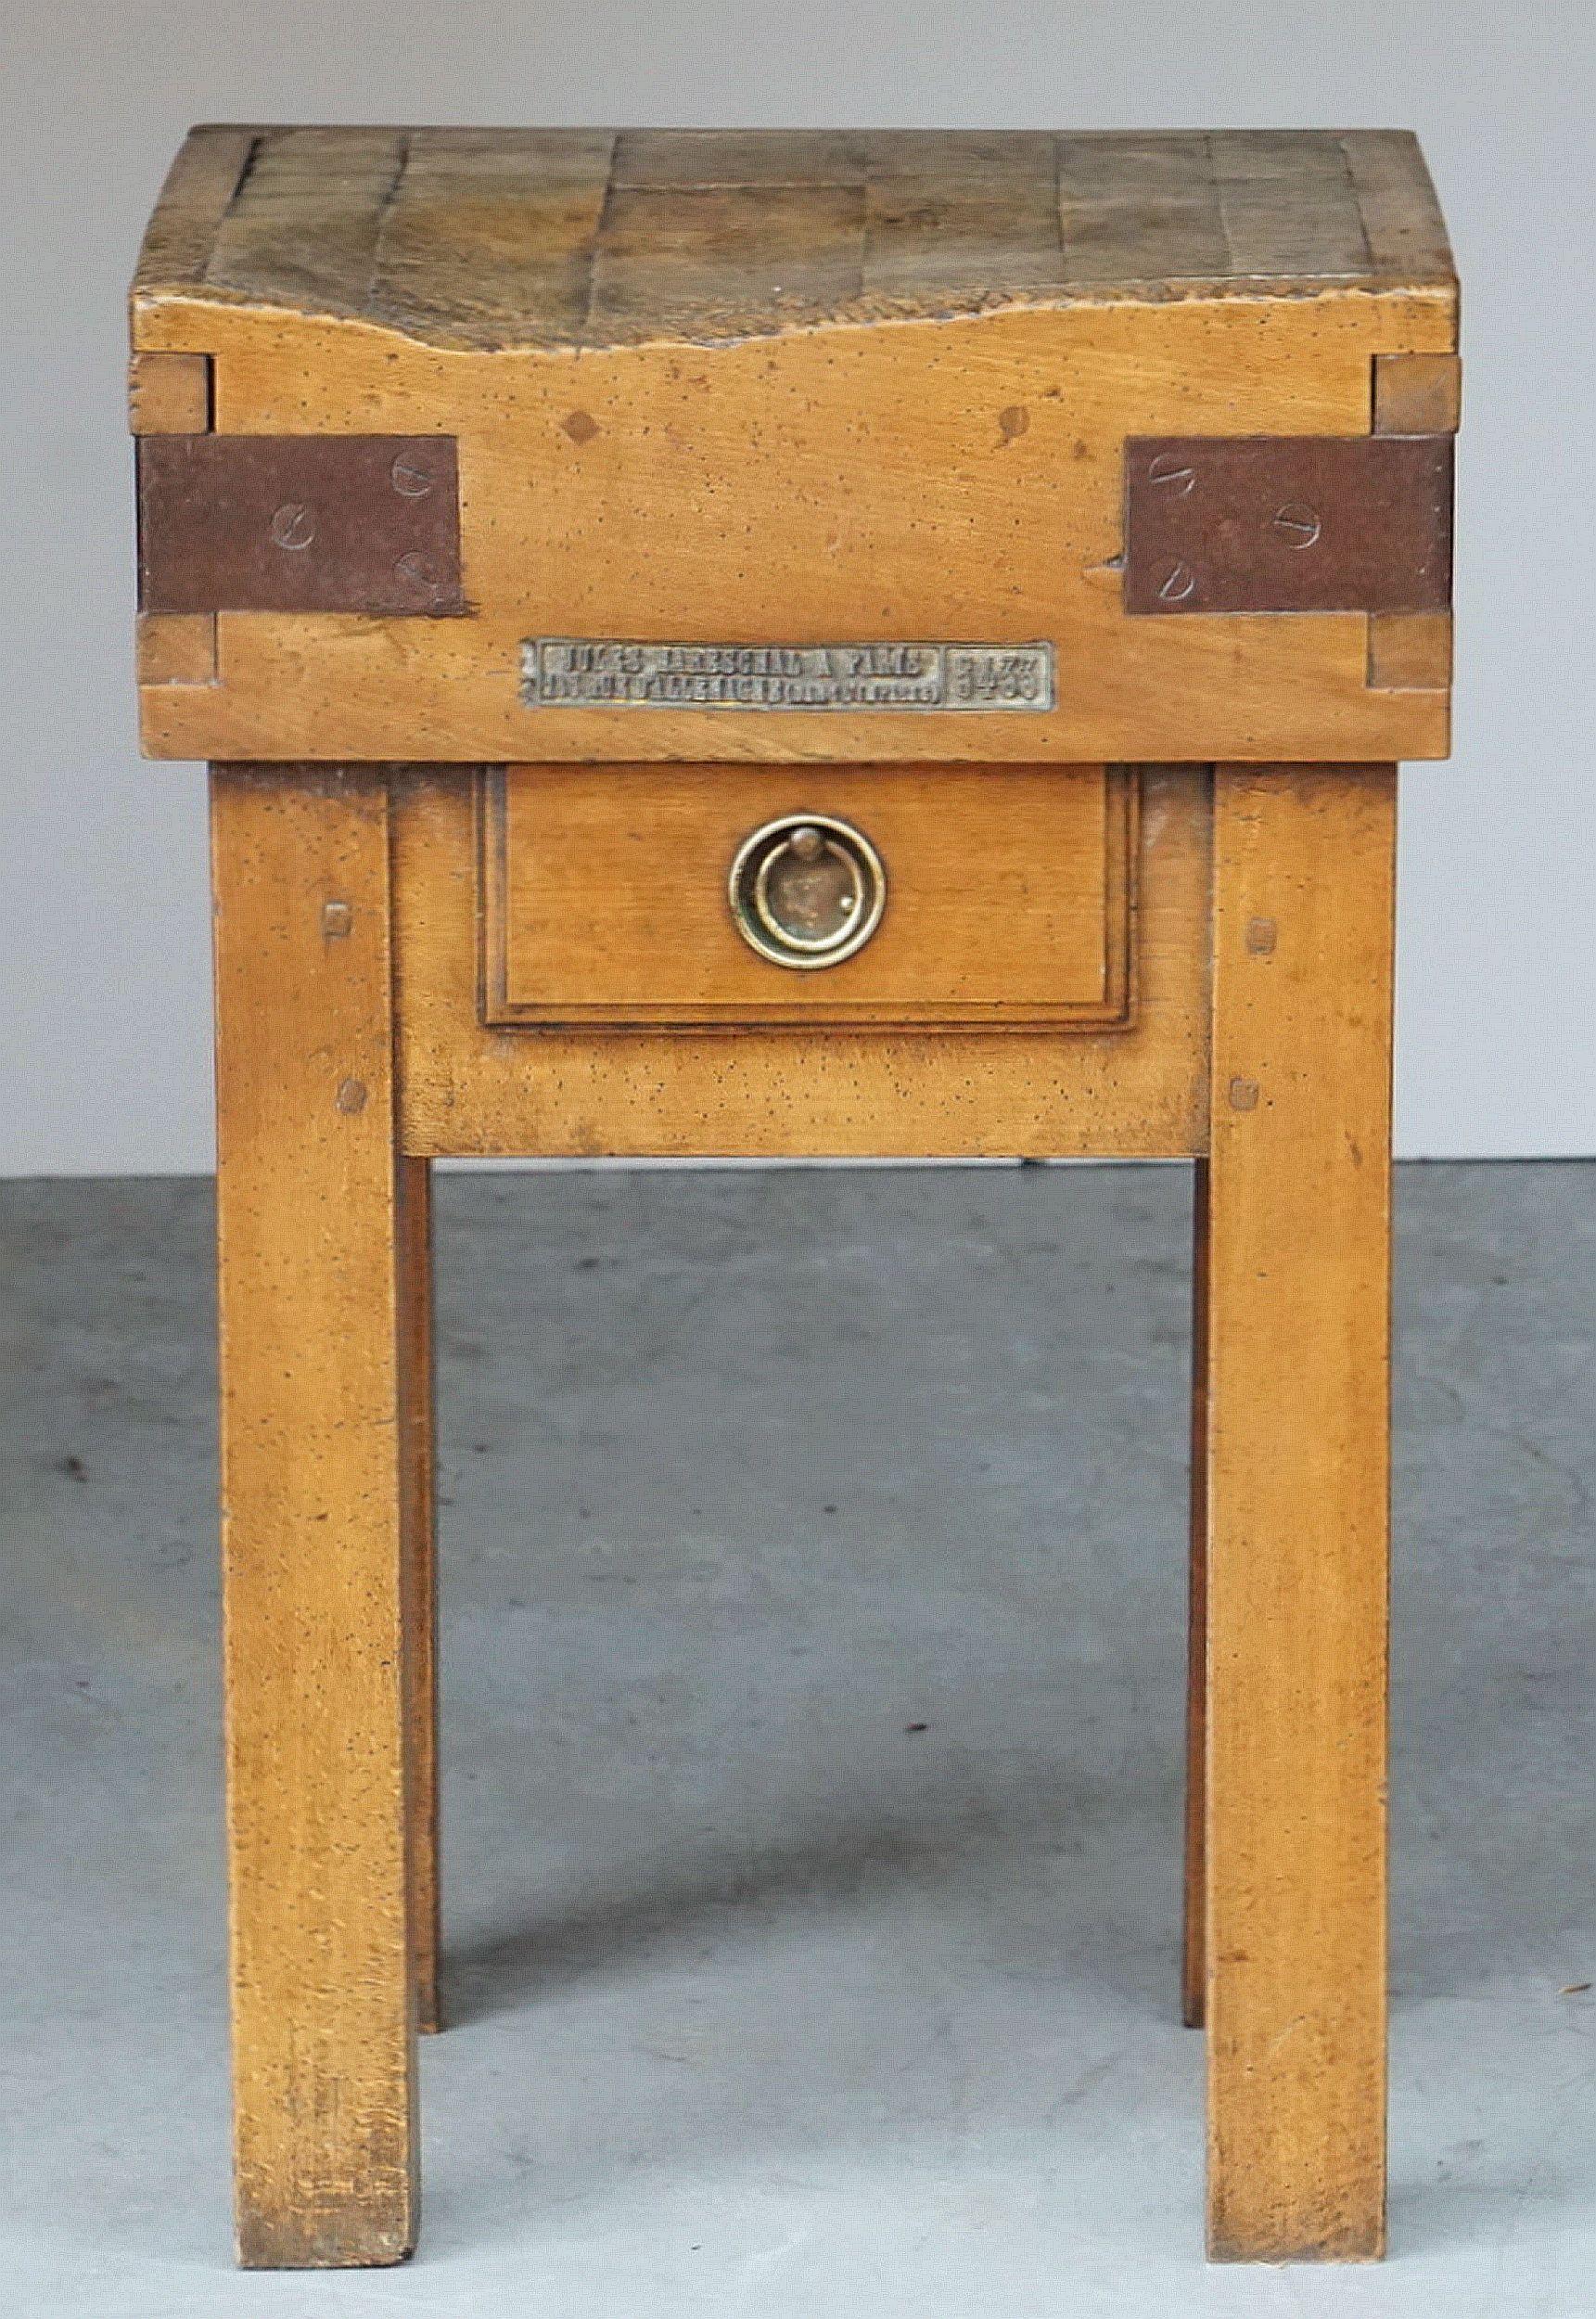 A handsome French butcher's chopping block or table, from the 19th century, featuring a large, square sloping block or slab of iron-bound wood set upon a four-legged support stand of pine. Stand with drawer and ring pull.

With label to front: